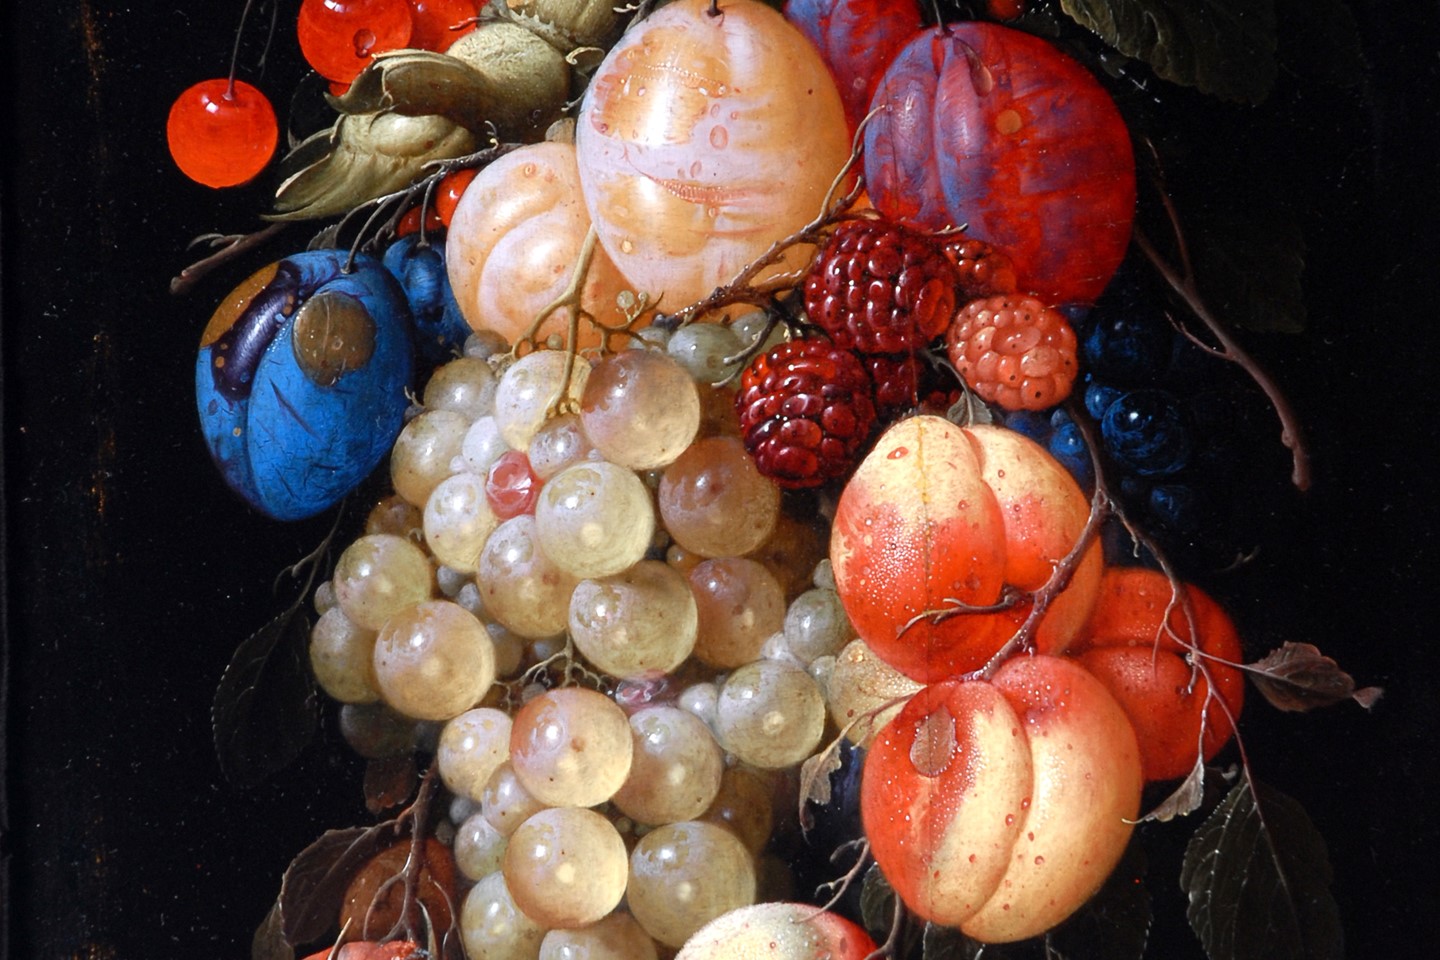  A Garland of Fruit Painting